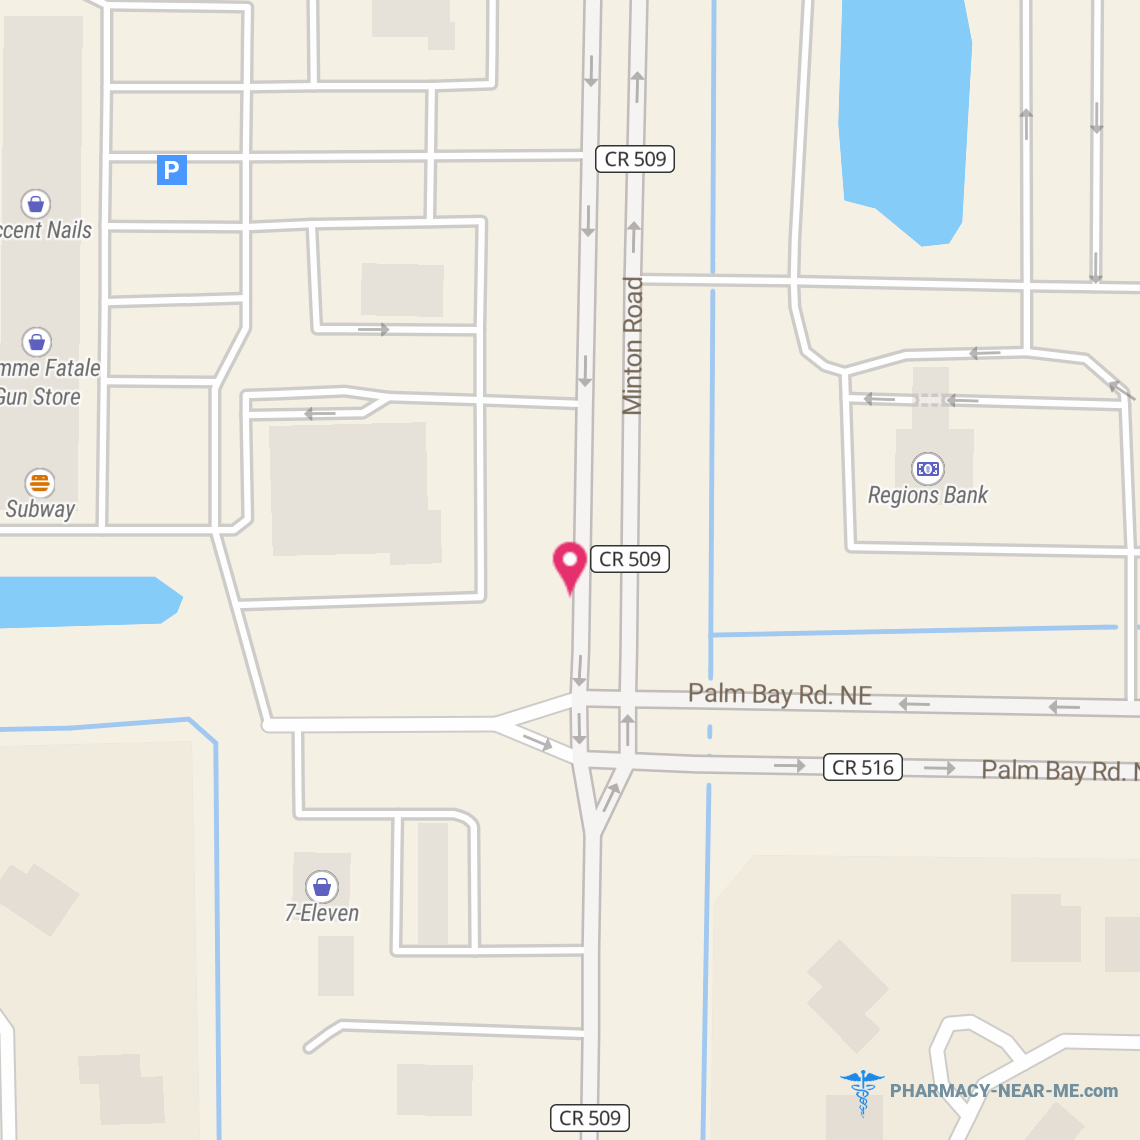 WALGREENS #05341 - Pharmacy Hours, Phone, Reviews & Information: 4280 Minton Rd, Palm Bay, Florida 32907, United States